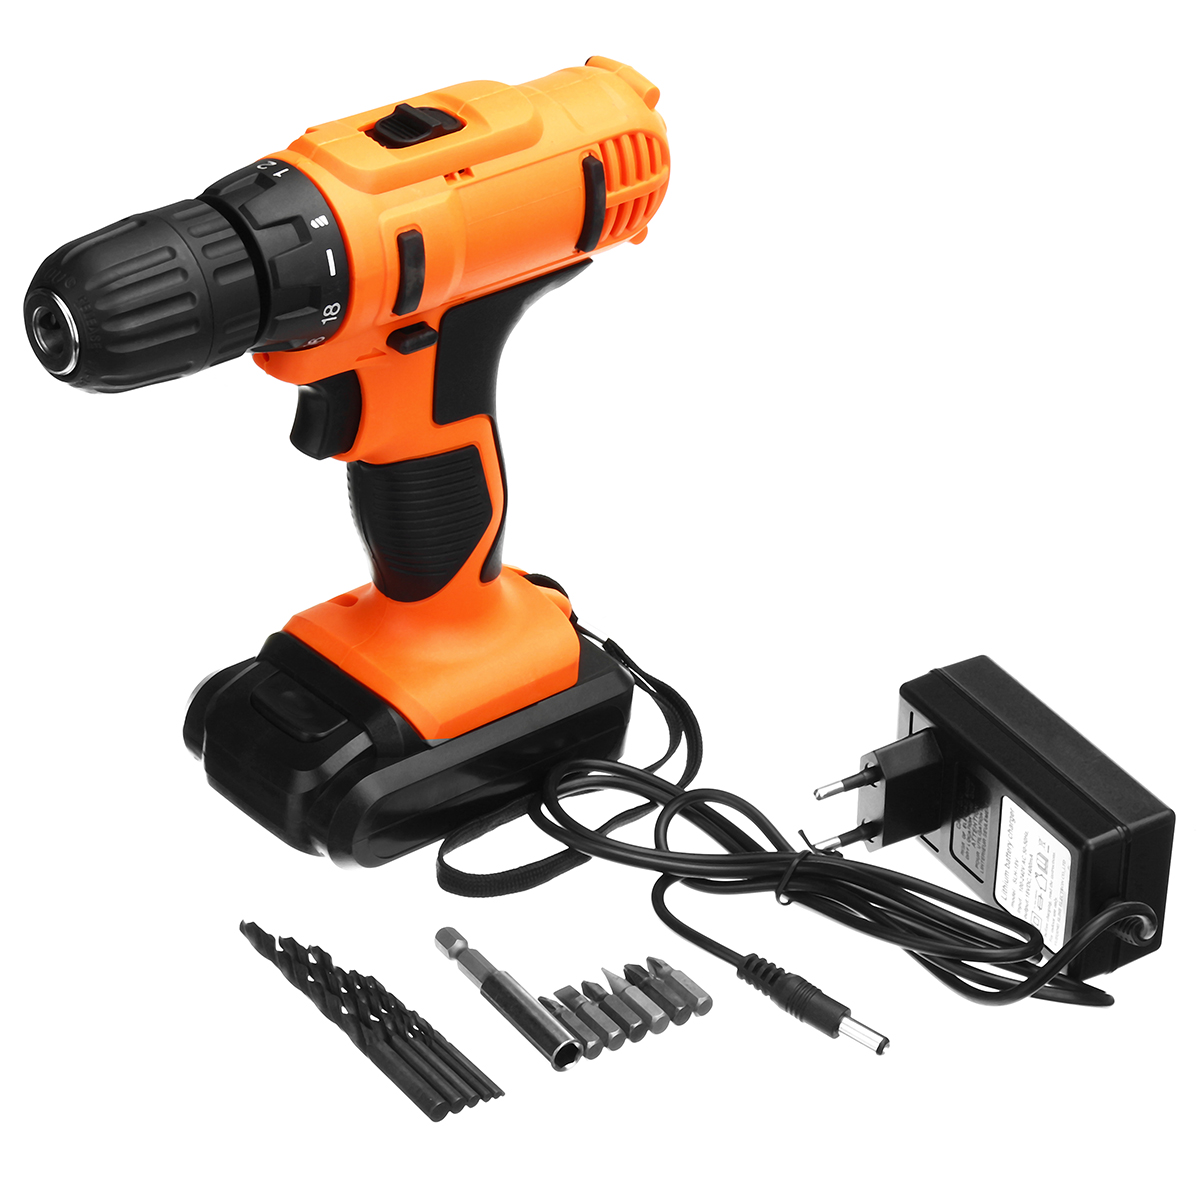 18V-Electric-Screwdriver-Cordless-Hammer-Impact-Power-Drill-Driver-Rechargeable-with-13Pcs-Drill-Bit-1324472-3